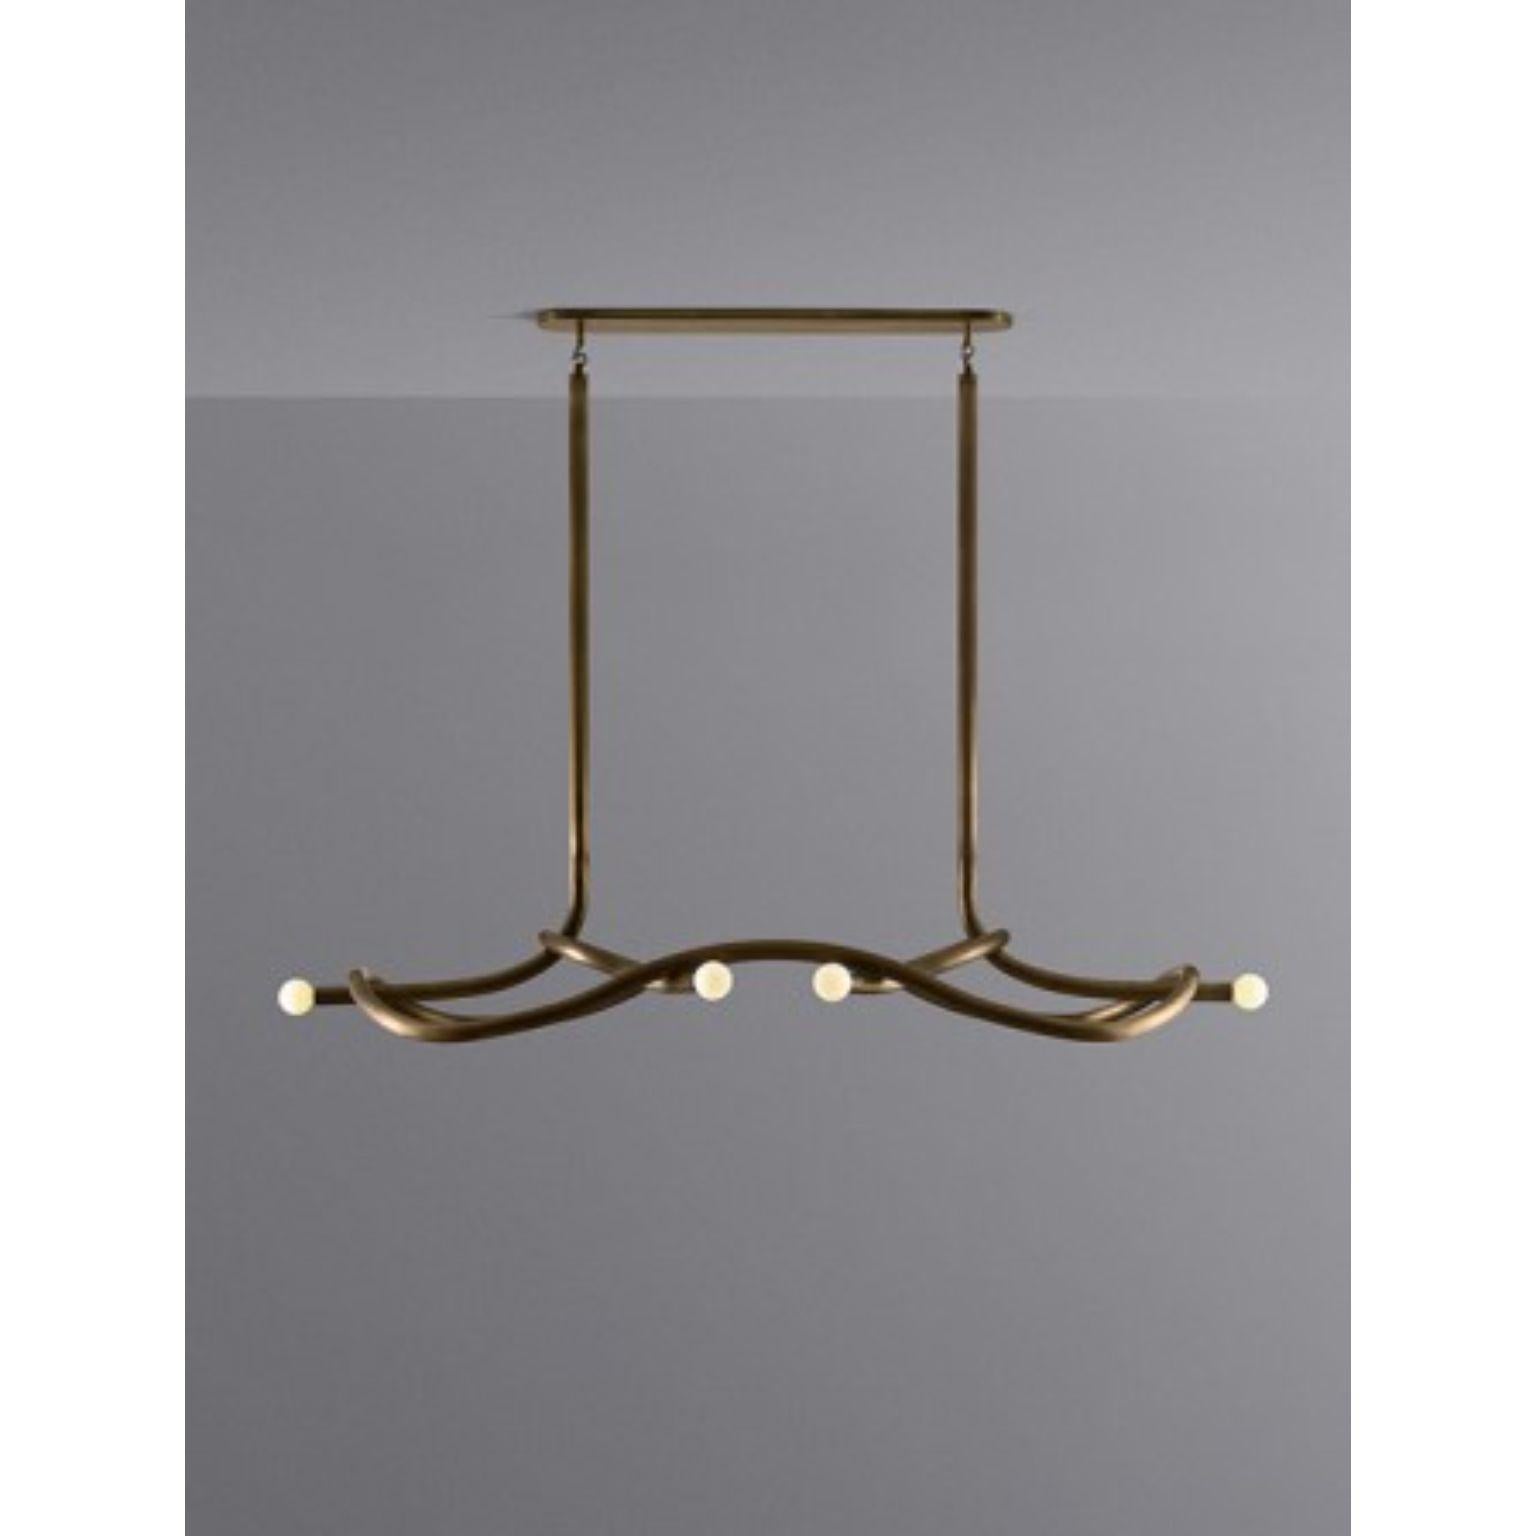 Tryst six chandelier by Paul Matter
Materials: Brass and porcelain finish glass
Dimensions: D205.7 x W111.7 x H 182.8 cm
Wight: 30 kg

Tryst chandelier explores the relationship between interlocked forms in perfect union and balance. A study of